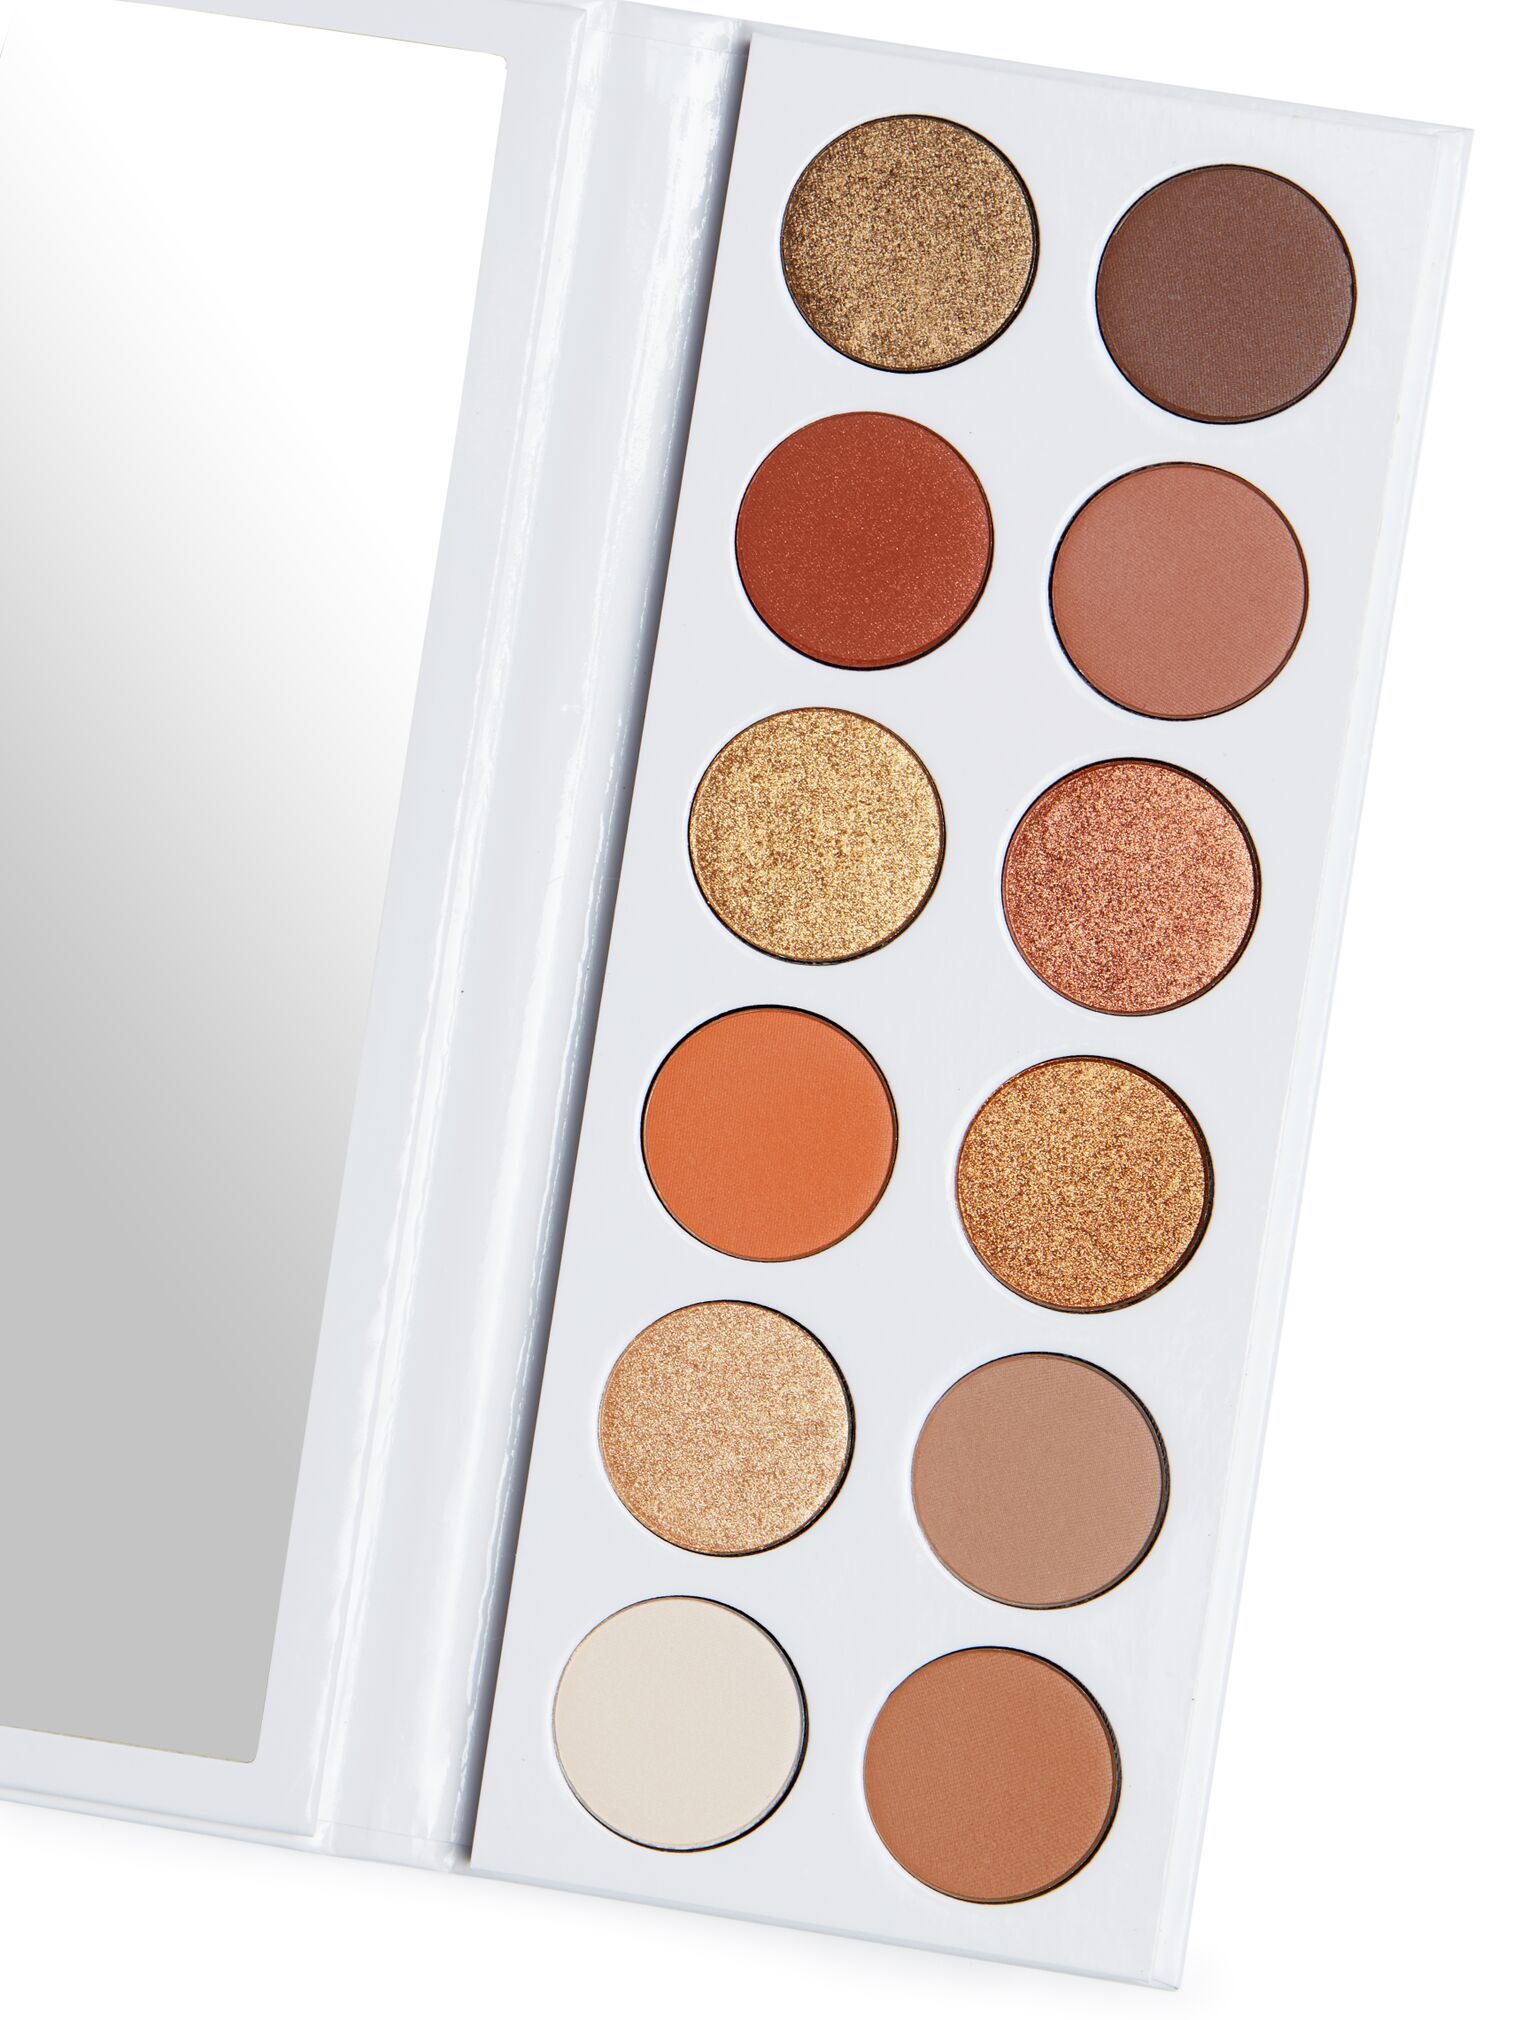 Image of The Bronze Extended Palette | Kyshadow